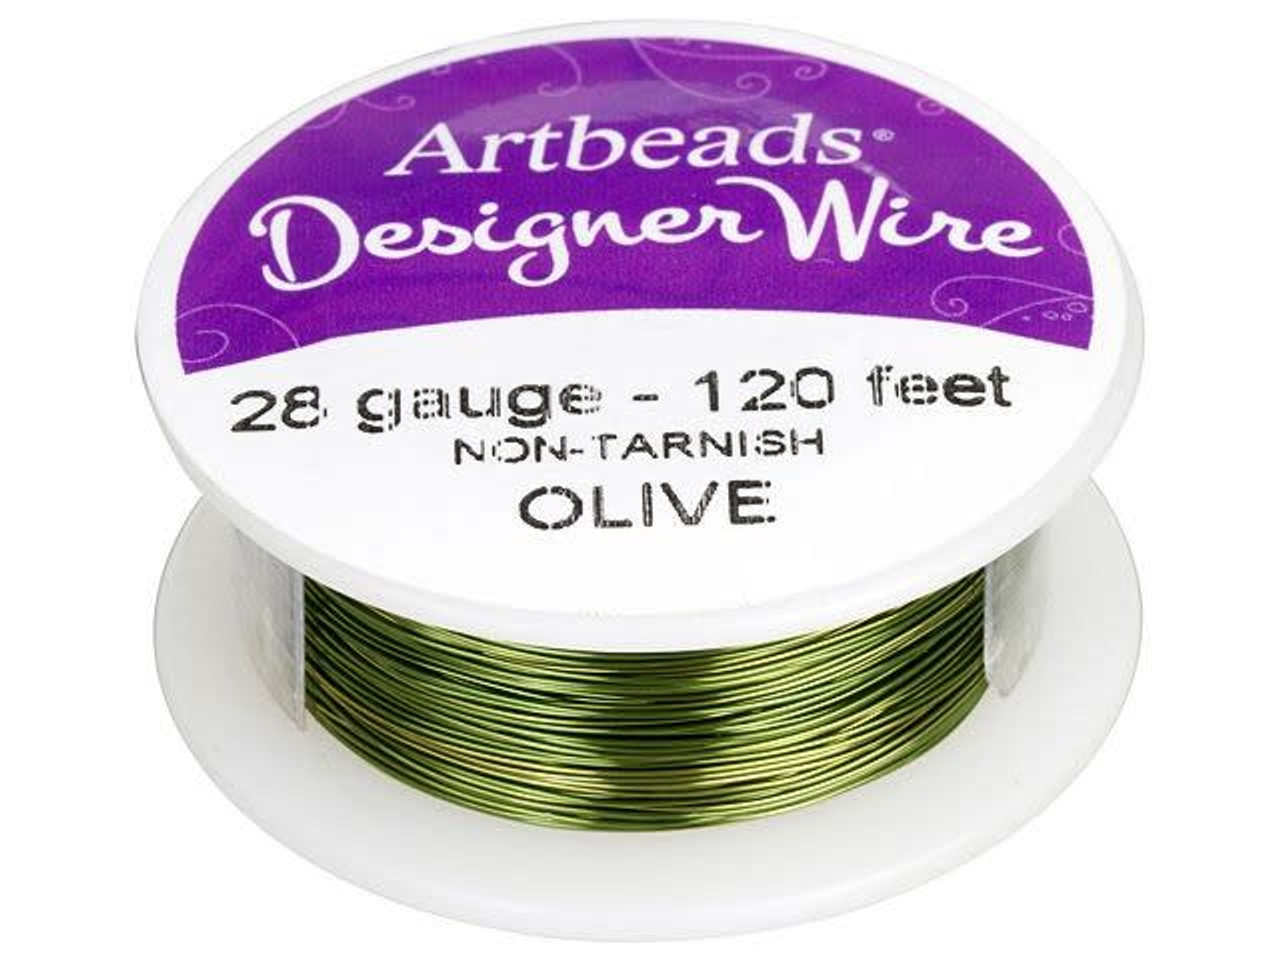 28 gauge wire (sold by the foot)